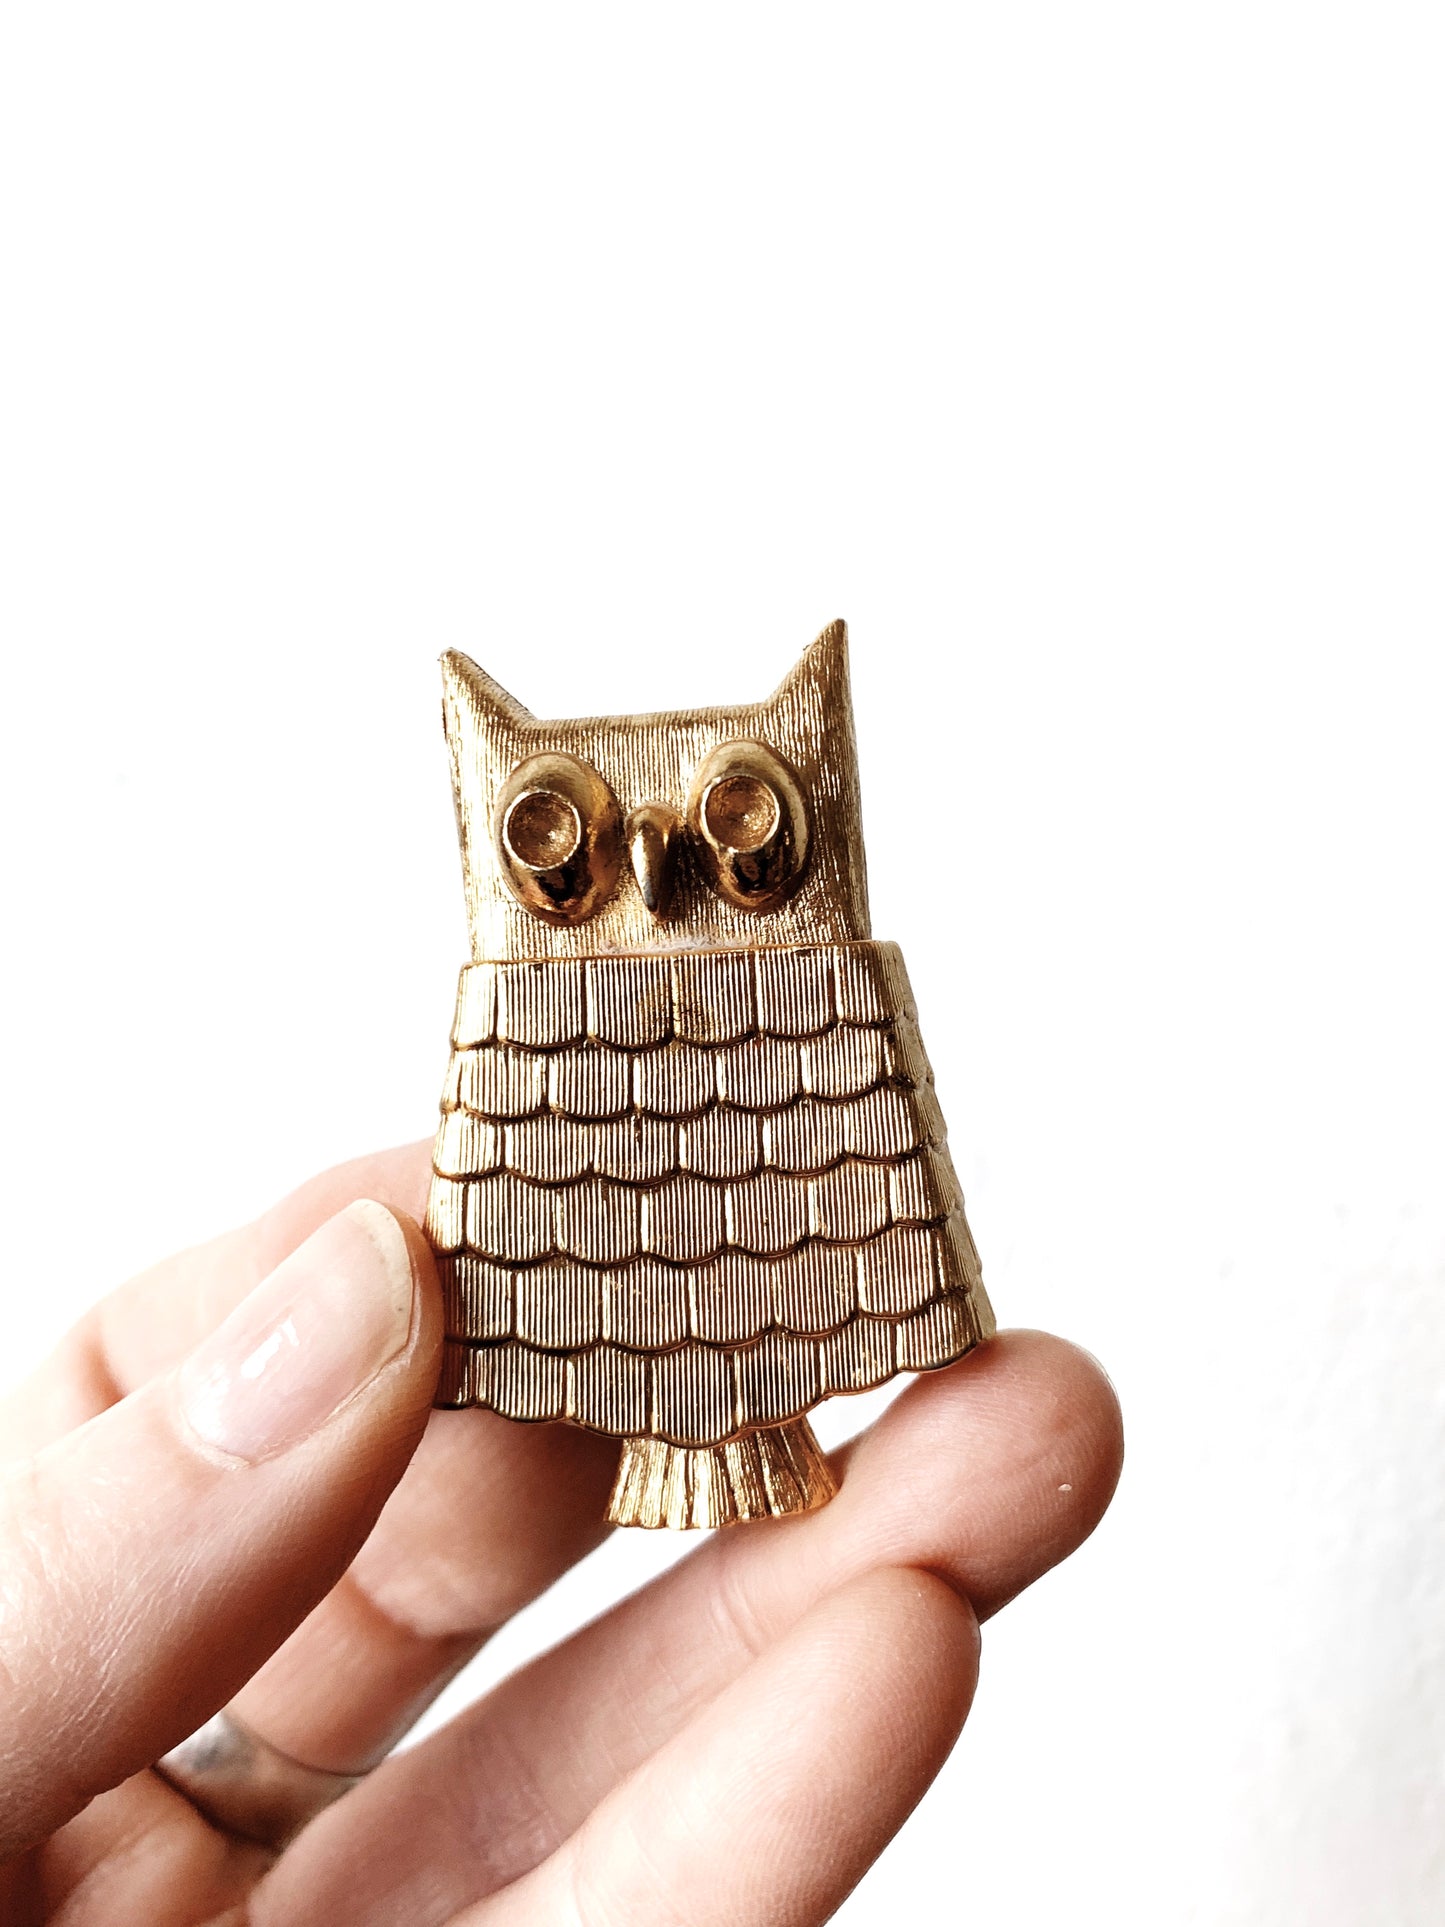 Vintage Goldtone Owl Pin with Solid Perfume or Lip Balm Compartment